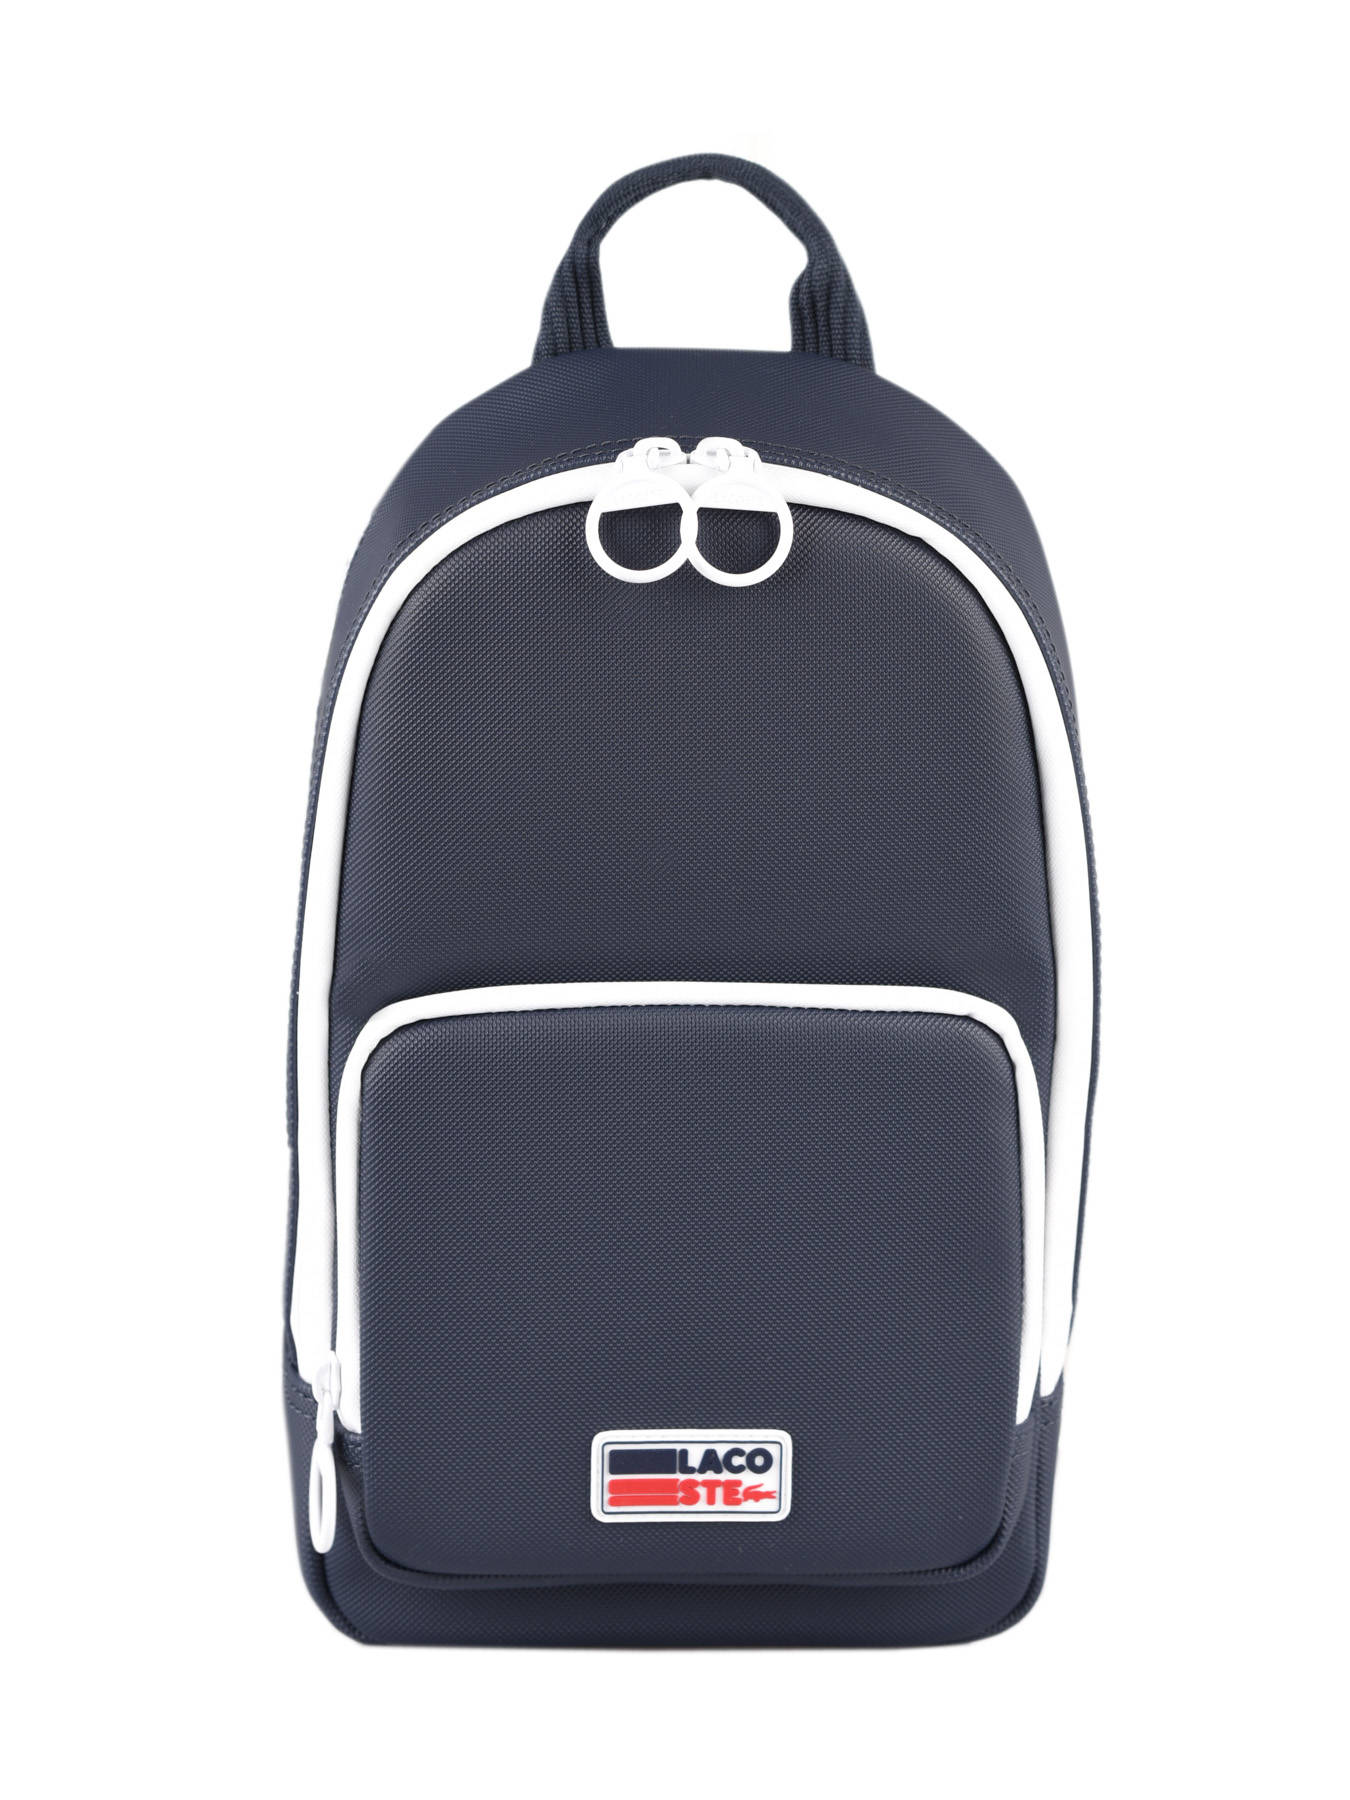 Lacoste Bagpack HF.3301.HF - best prices